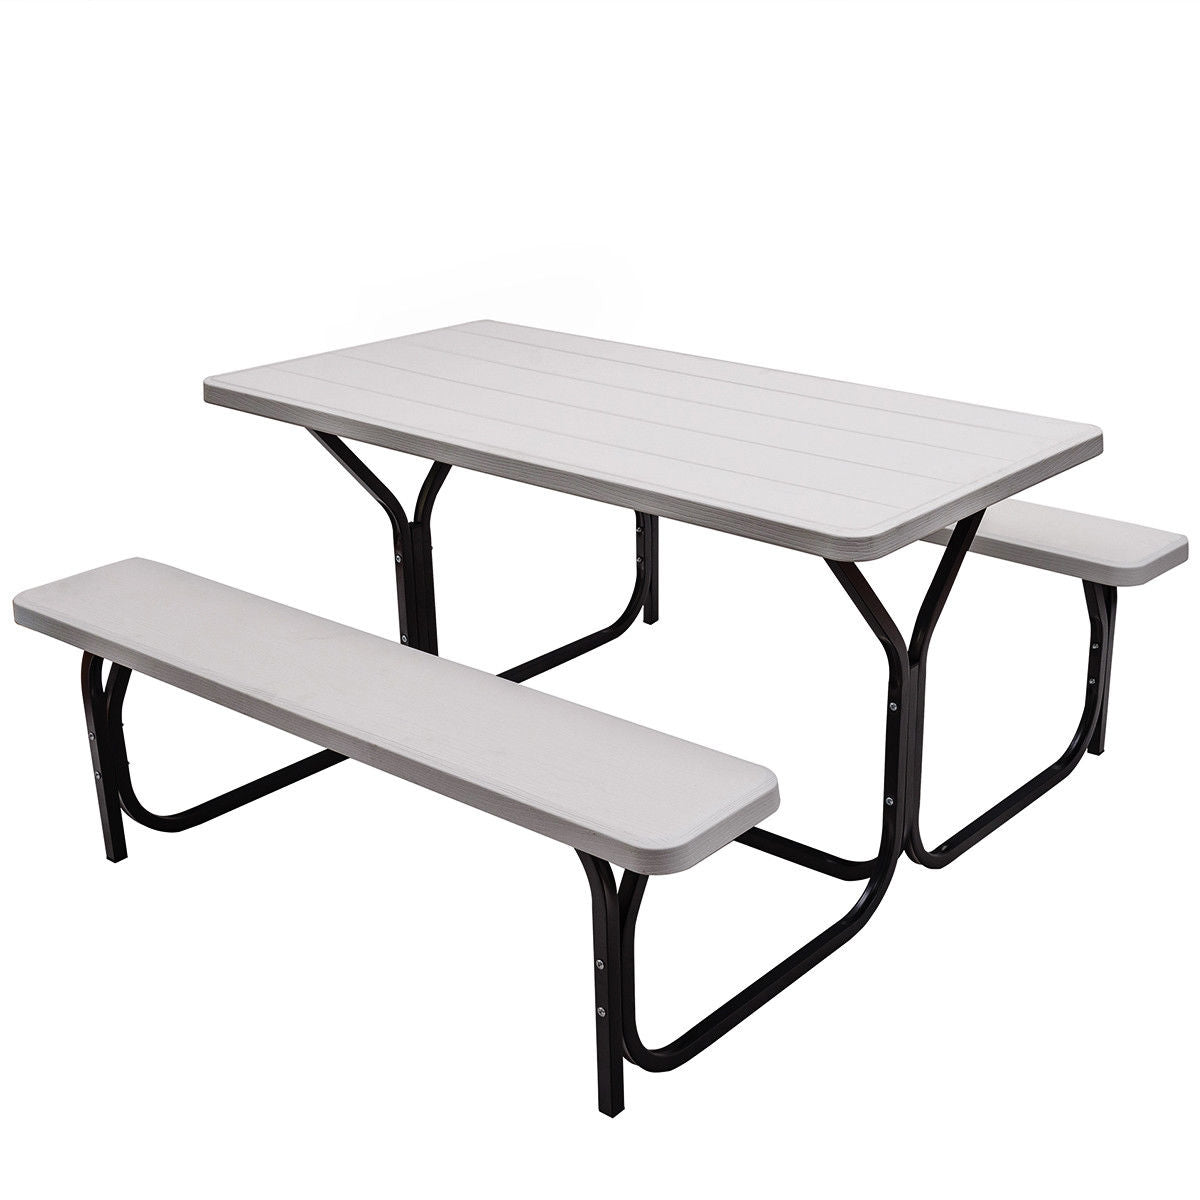 HDPE Outdoor Picnic Table Bench Set with Metal Base for Camping